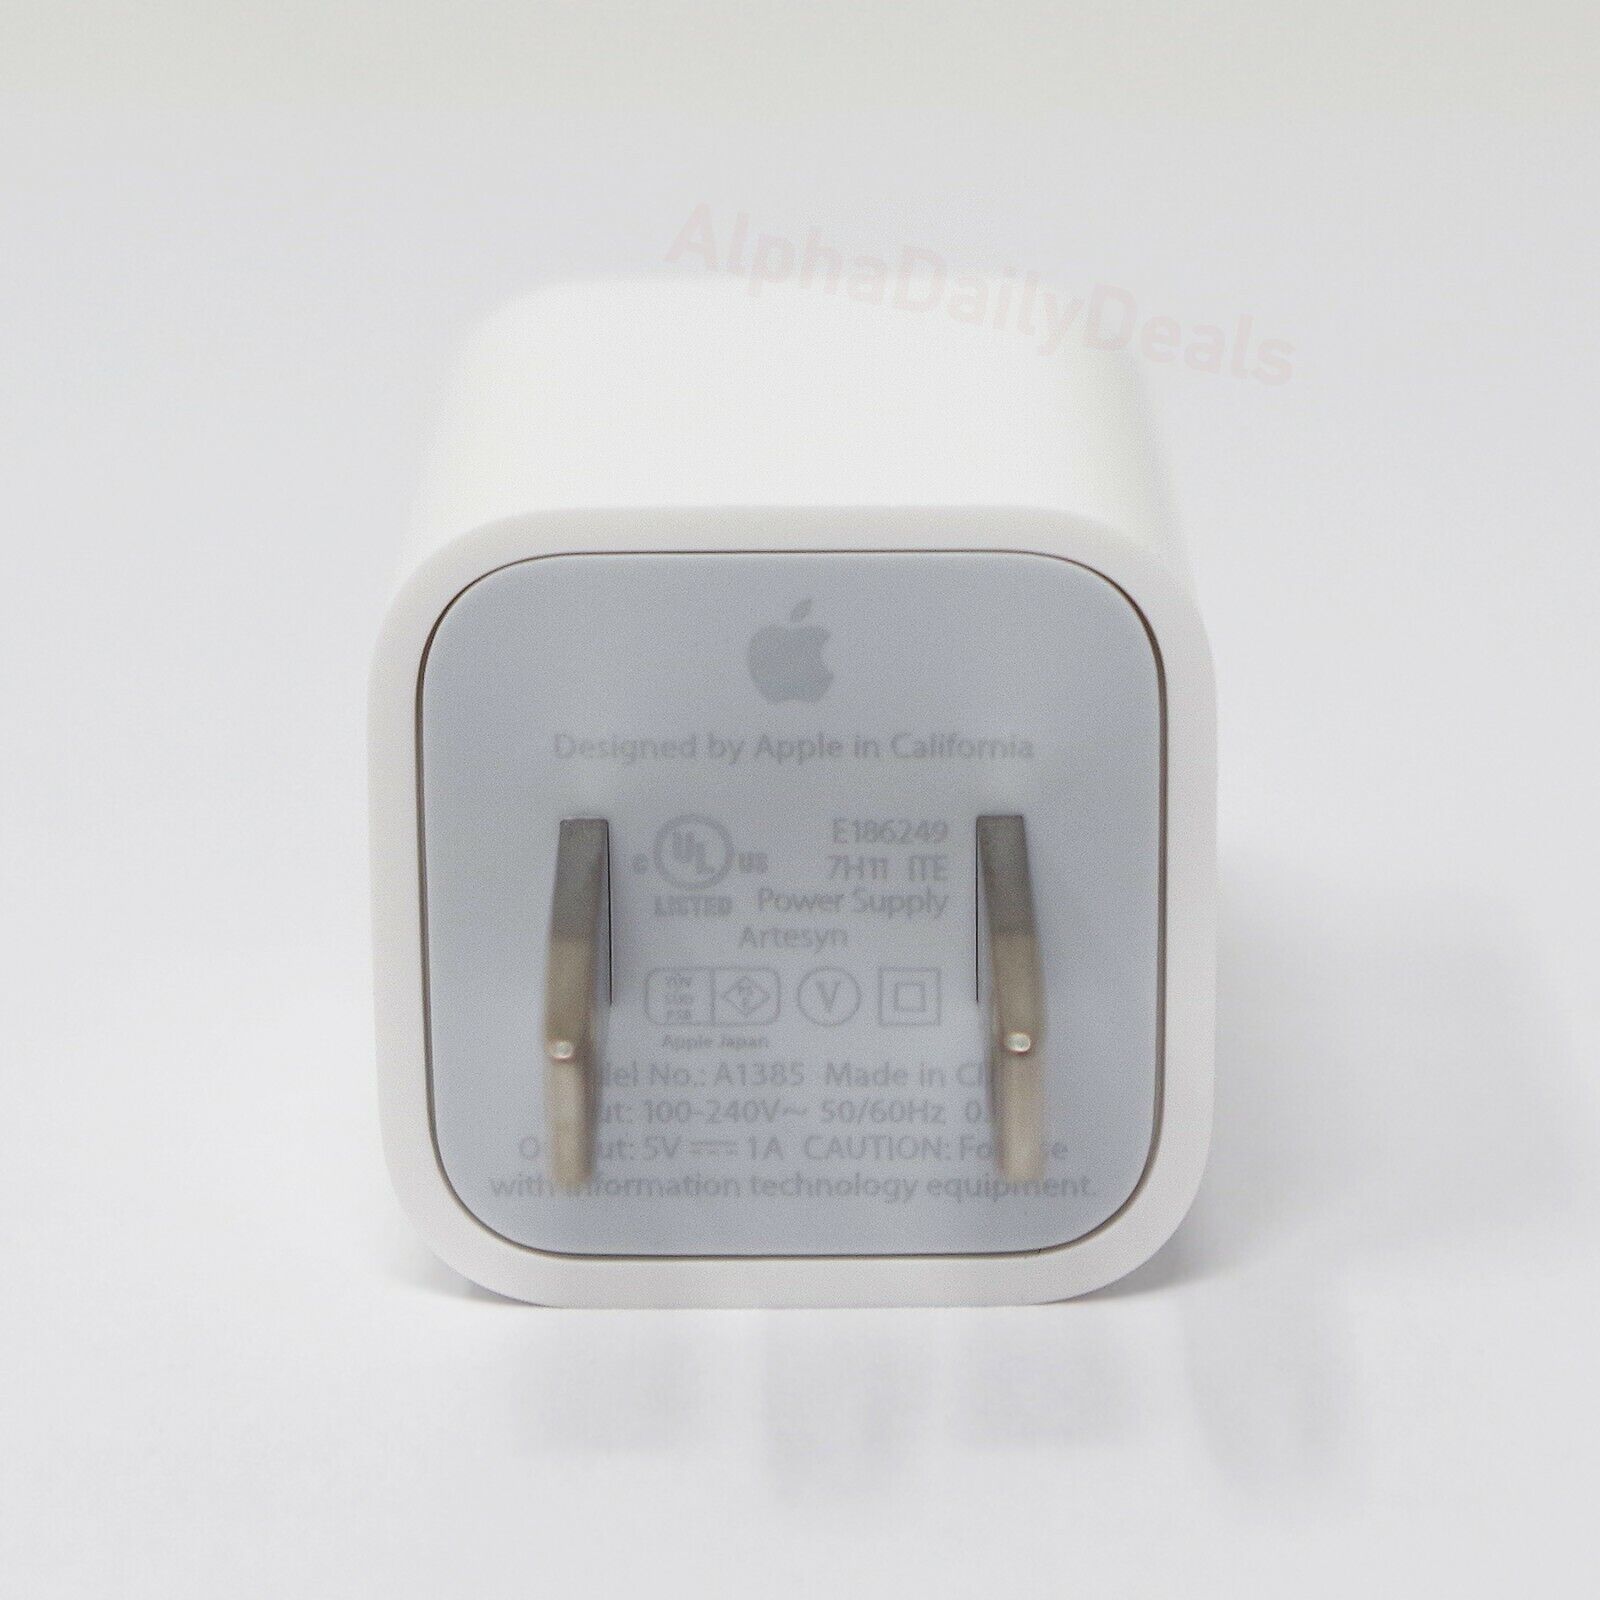 Genuine OEM Apple A1385 5W USB Travel Power Adapter Cube Charger iPhone iPad